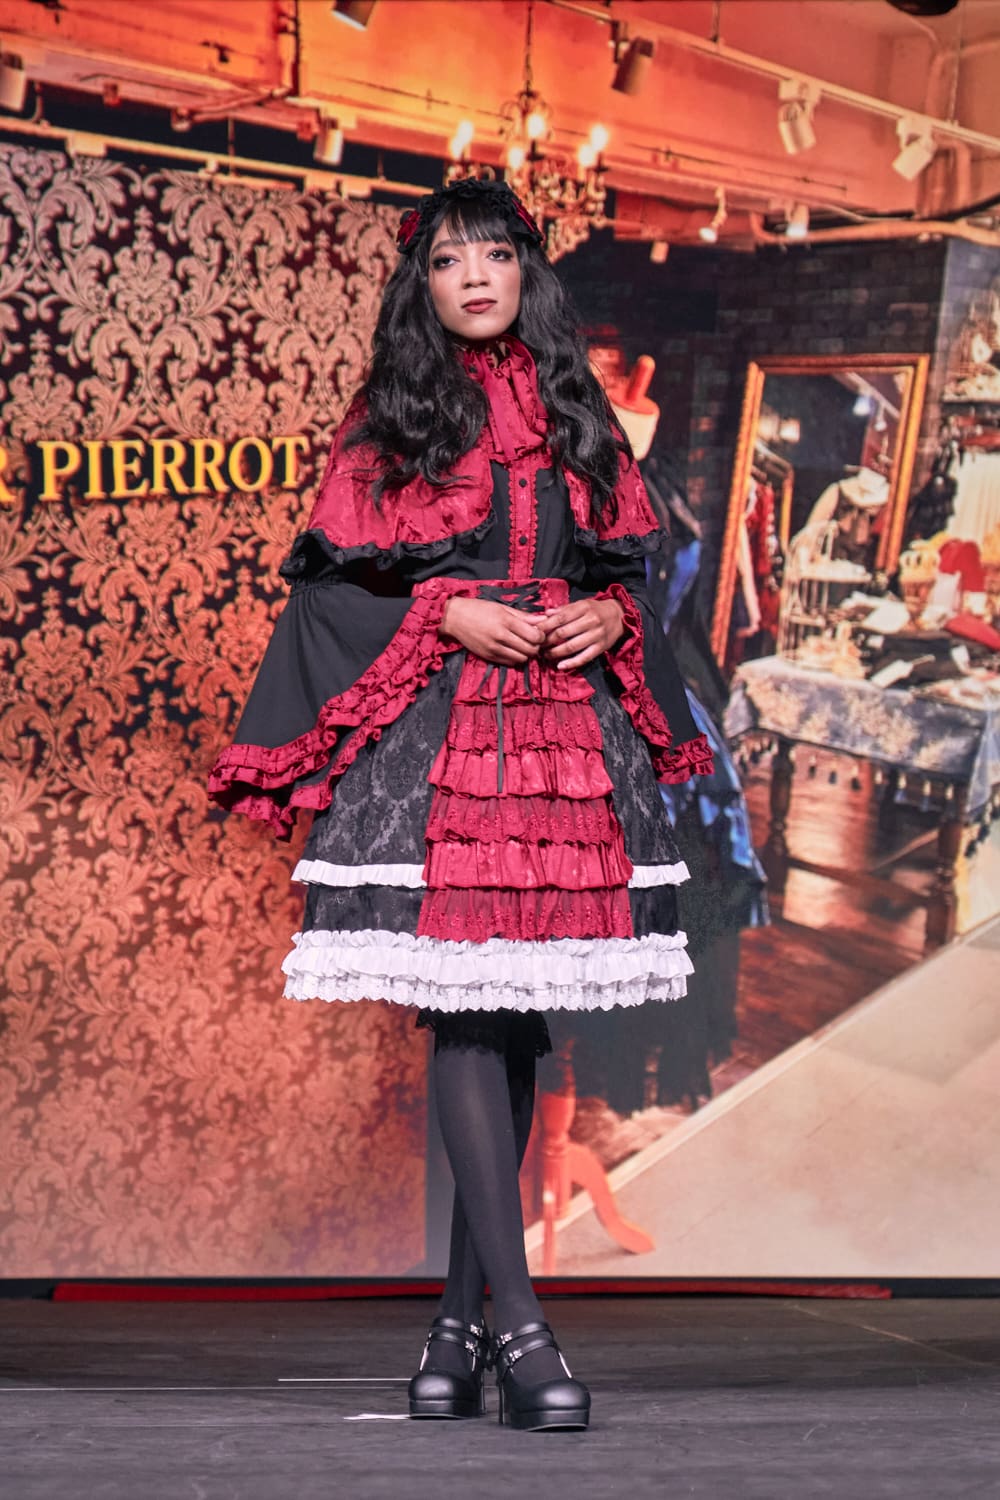 Atelier Pierrot gothic lolita model wearing black, red, and white collaboration set of a capelet, blouse, and skirt set - full body standing pose 1.